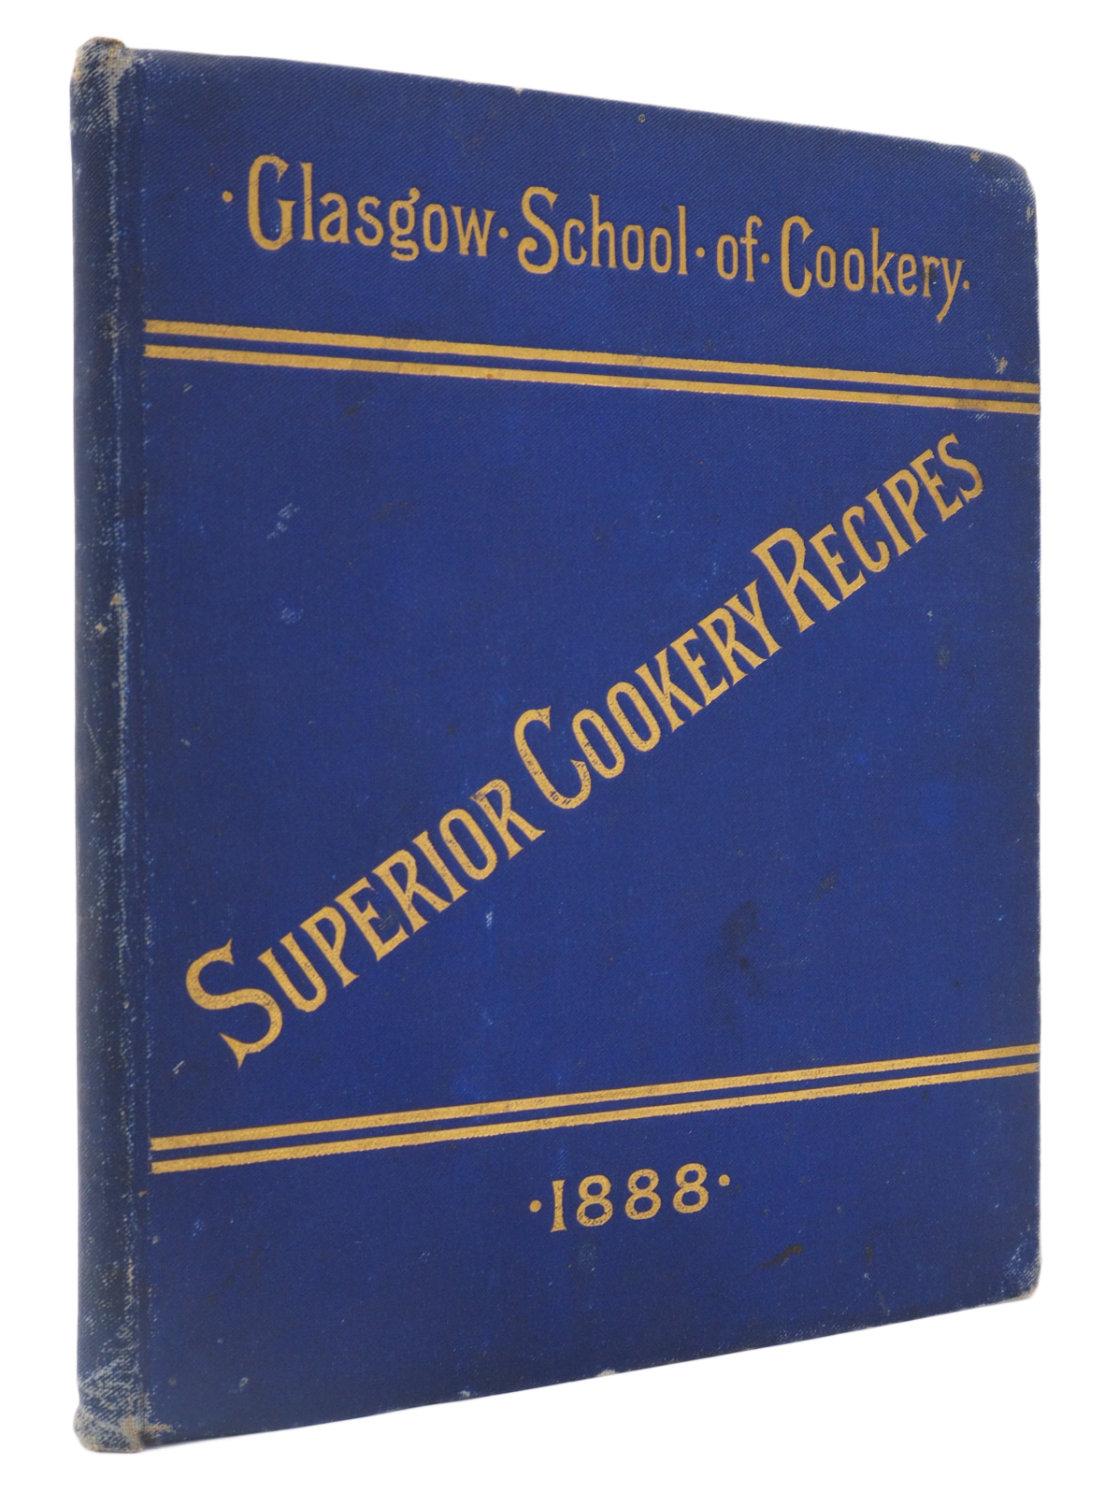 Paper Vintage Culinary Charm: Recipes Published in 1888 by Glasgow School of Cookery For Sale